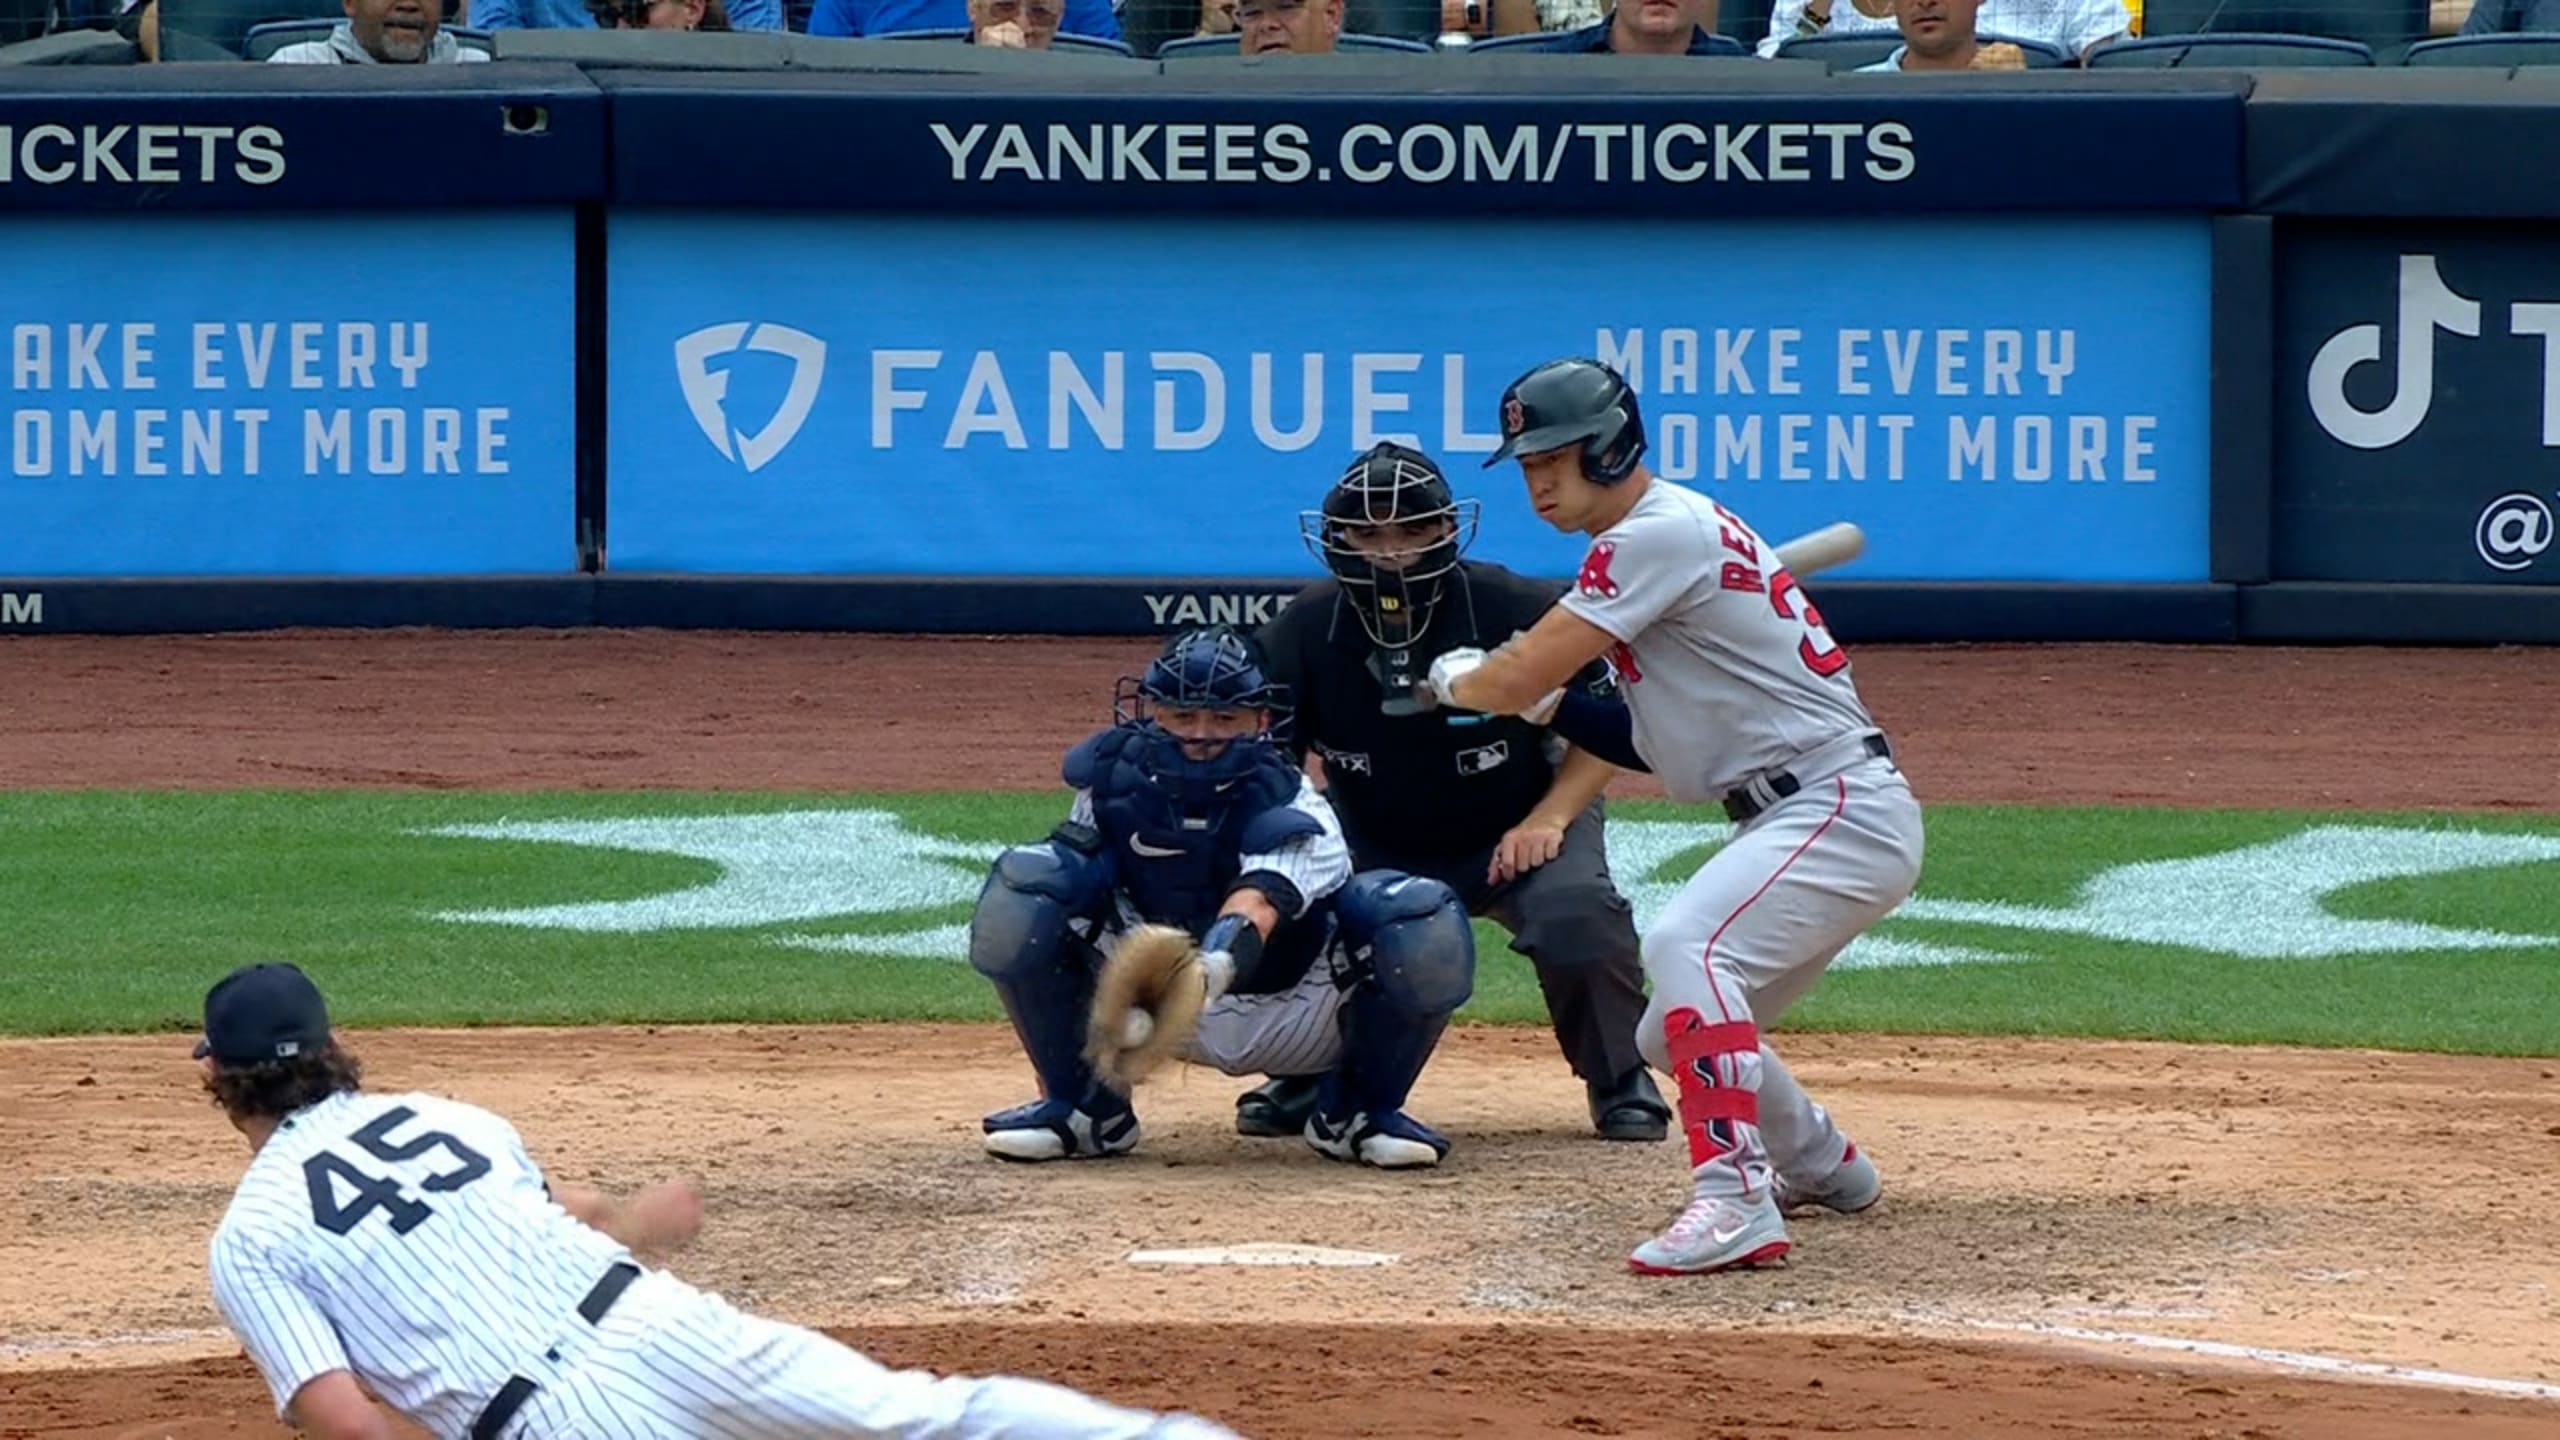 Yankees' 13-2 win over Red Sox closes terrific first half - Pinstripe Alley